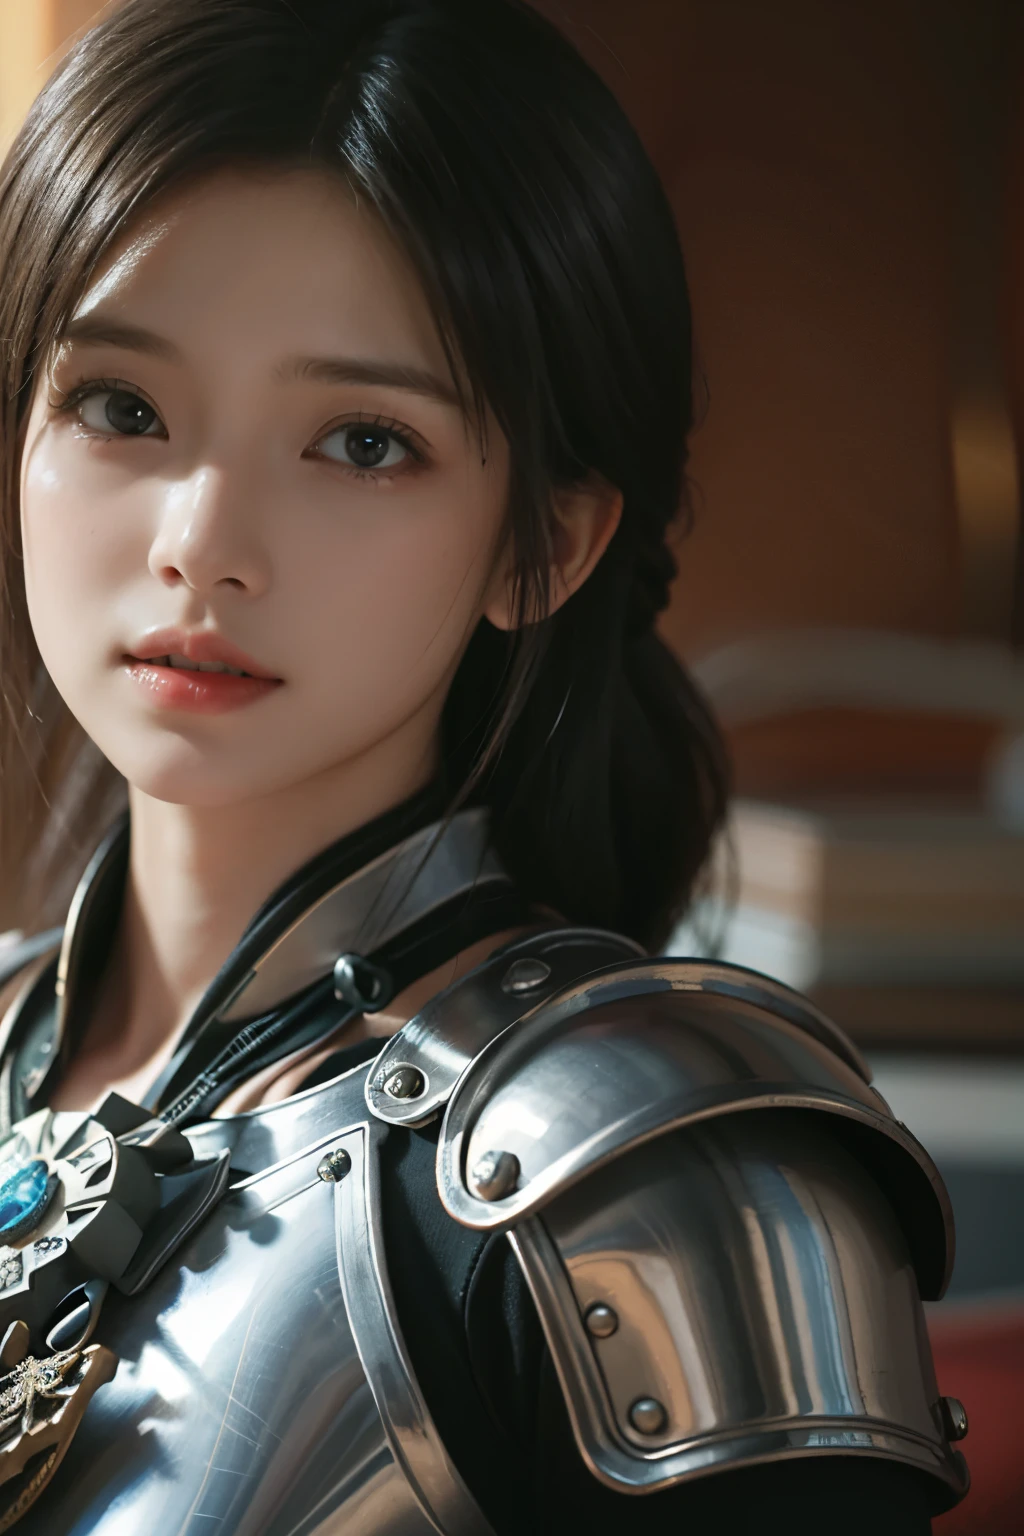 Game art，The best picture quality，Highest resolution，8K，(A bust photograph)，(Portrait)，(Head close-up)，(Rule of thirds)，Unreal Engine 5 rendering works， (The Girl of the Future)，(Female Warrior)， 
20-year-old girl，An eye rich in detail，(Big breasts)，Elegant and noble，indifferent，brave，
（Medieval knight armor combined with magical elements，A complex pattern of magic，A dress characteristic rich in detail，Jewelry），Medieval Lady Knight，
Photo poses，Simple background，Movie lights，Ray tracing，Game CG，((3D Unreal Engine))，oc rendering reflection pattern